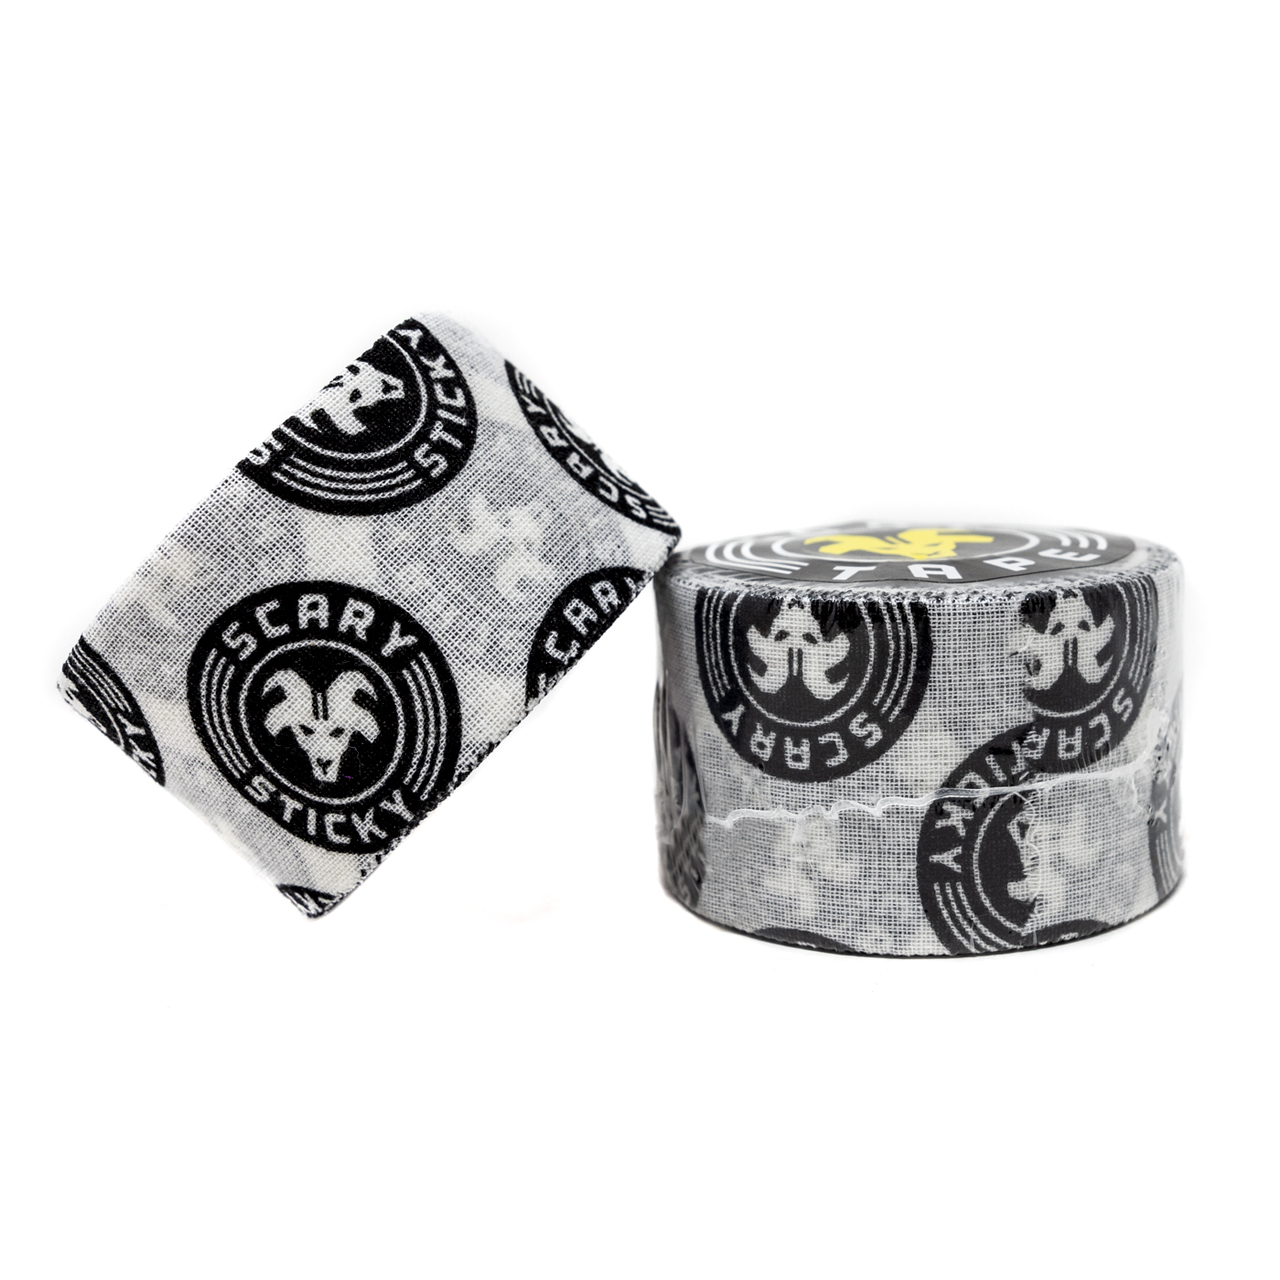 Goat Tape Scary Sticky Premium Athletic / Weightlifting Tape